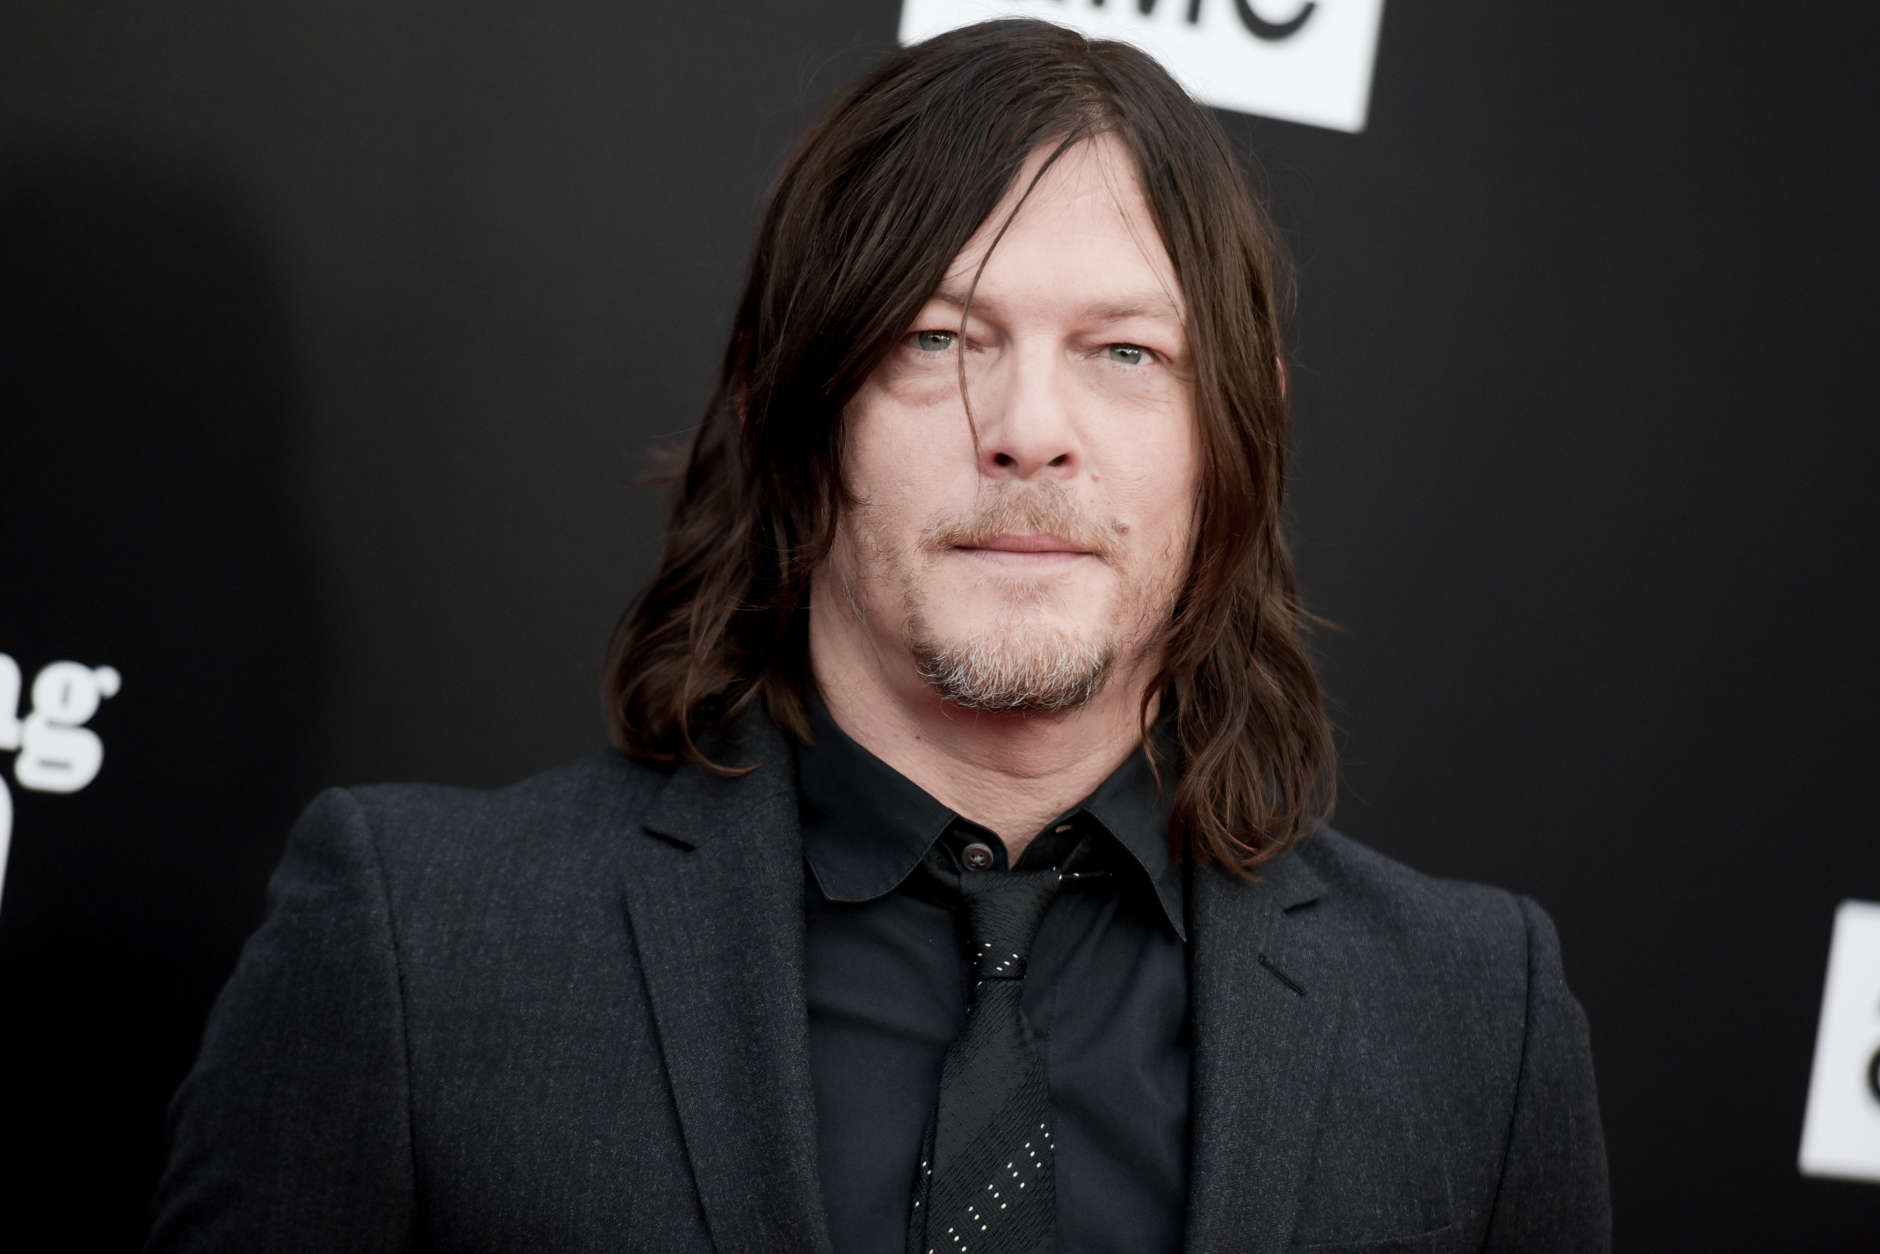 Norman Reedus attends the Live Special Edition of "Talking Dead" at the Hollywood Forever Cemetery on Sunday, Oct. 23, 2016, in Los Angeles. (Photo by Richard Shotwell/Invision/AP)